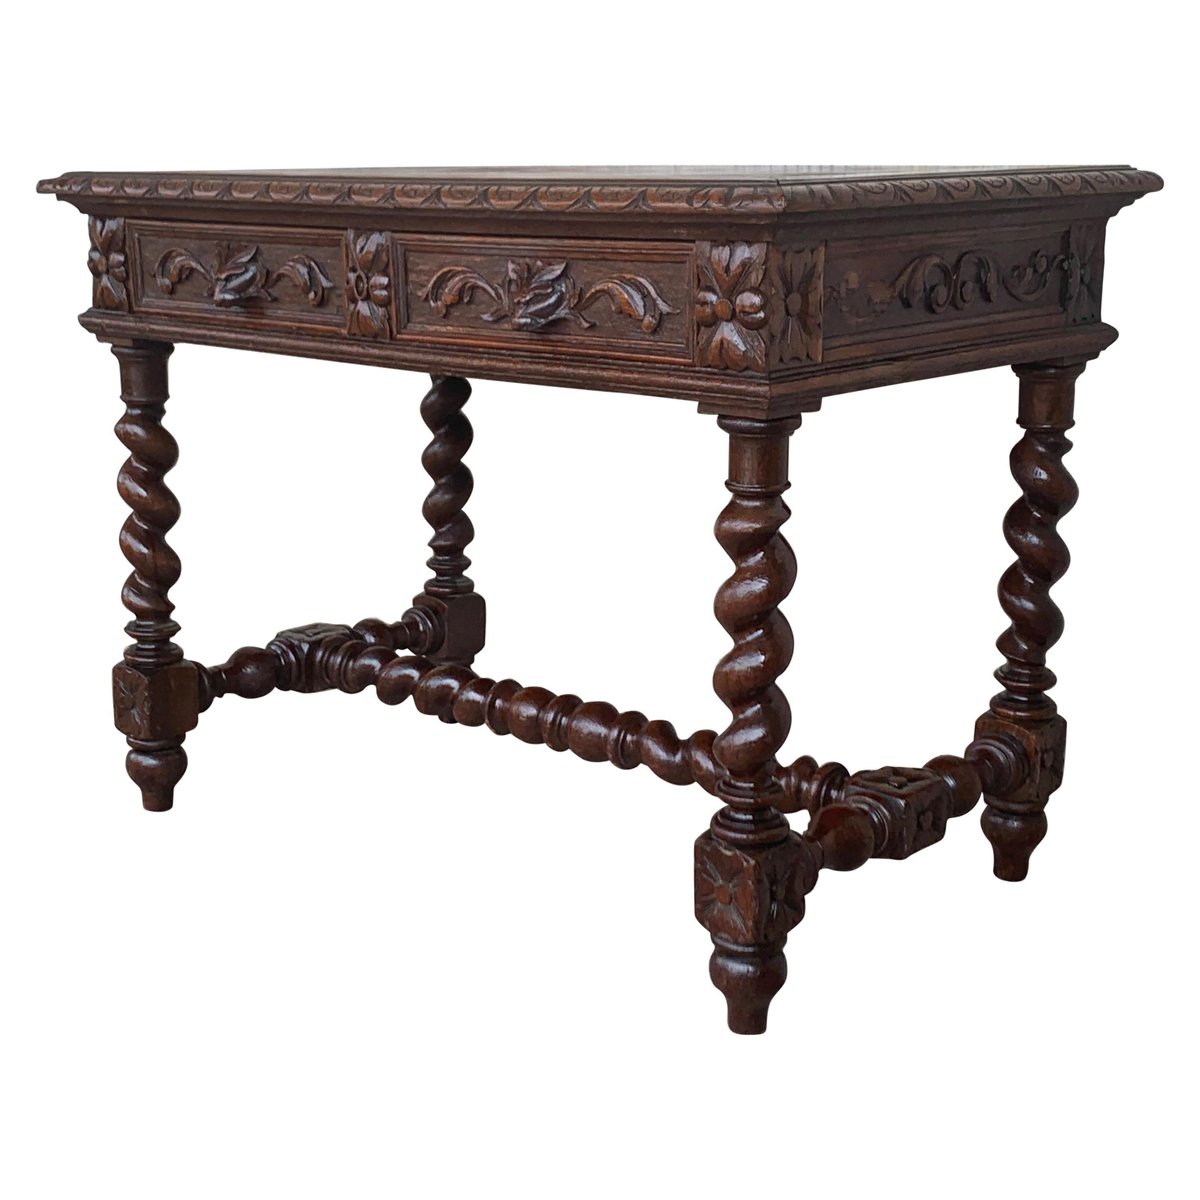 19th century spanish walnut desk with two drawers and solomonic turning legs PSK-1002695